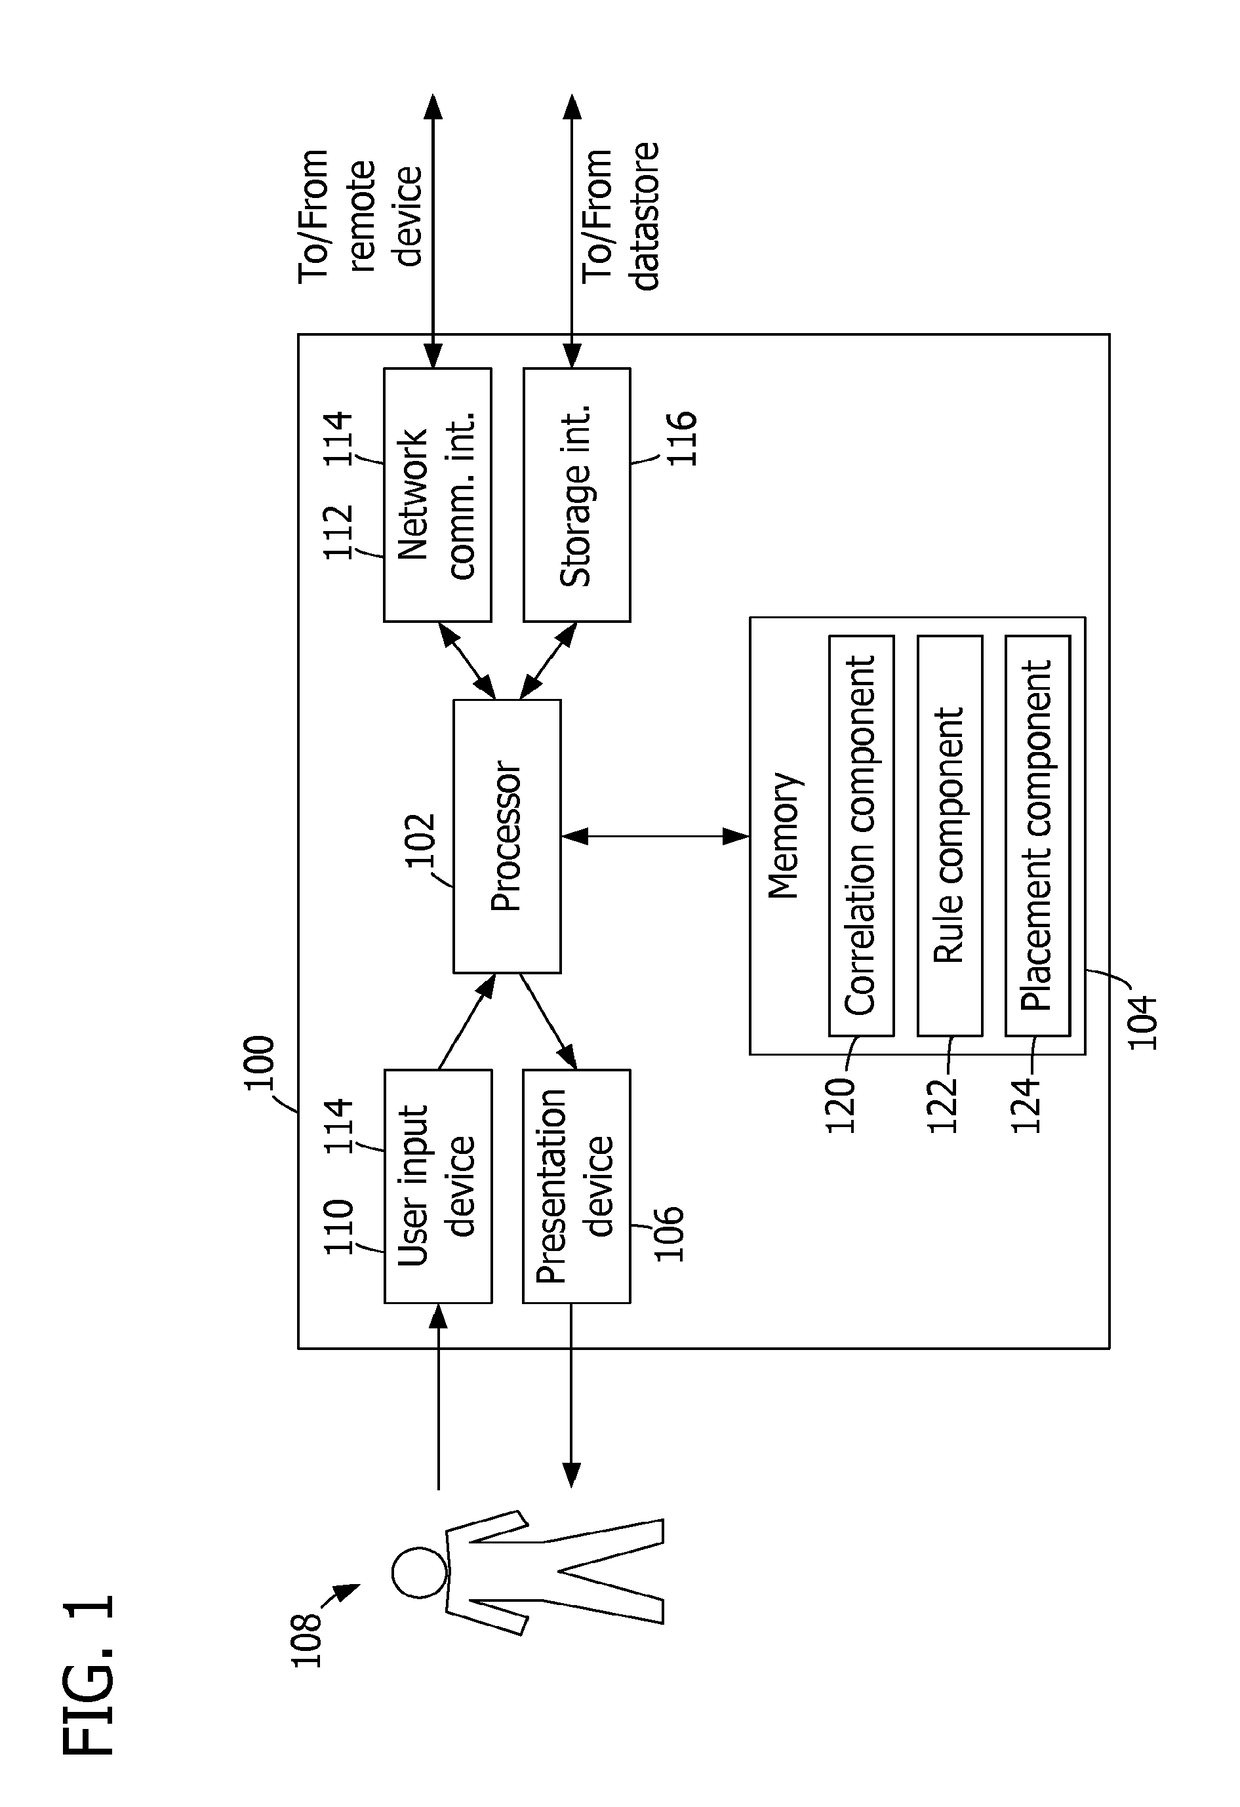 Application-specific data in-flight (DIF) services along a communication path selected based on a dif services policy associated with a vm